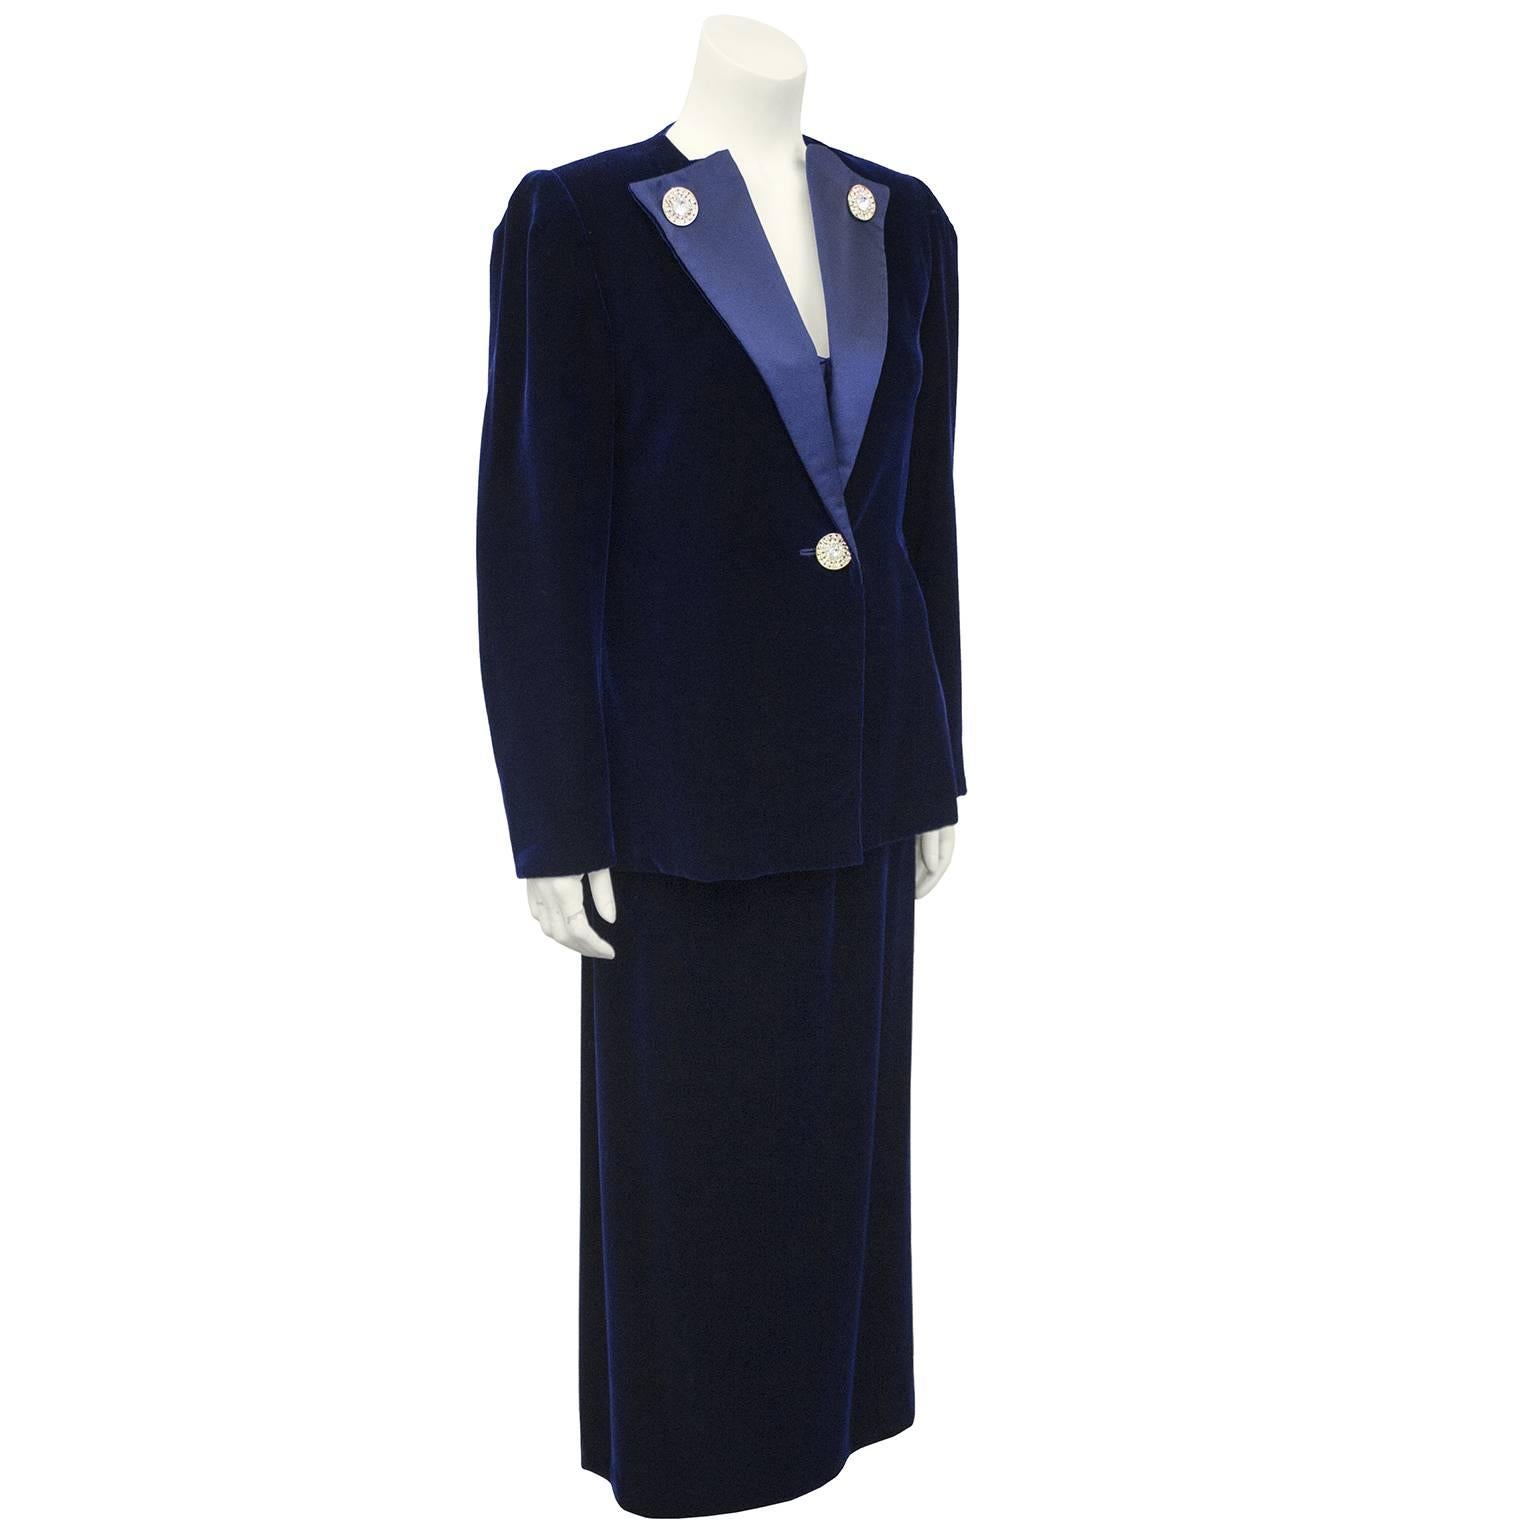 1970s three piece navy blue ensemble by Canadian demi couture designer Maggie Reeves. Velvet blazer with a silk lapels, embellished rhinestone button details and matching single button closure. Blazer has beautiful floral lace cut out with hand